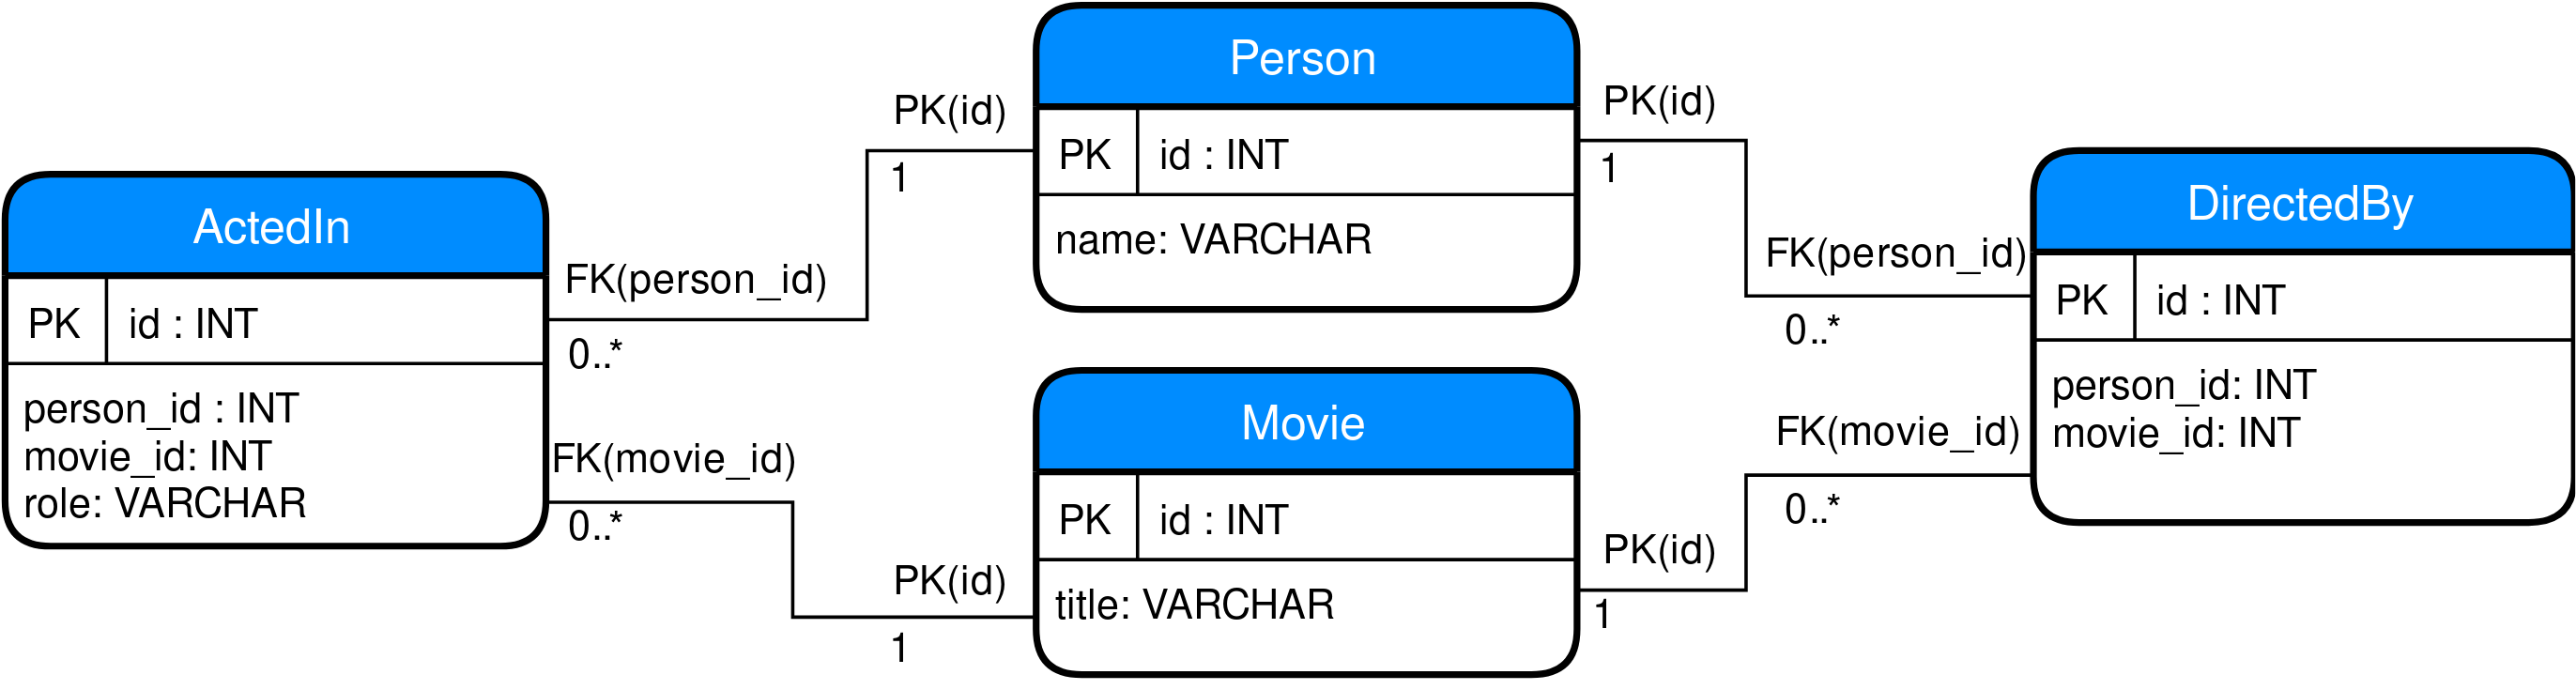 Figure 3: SQL schema for the movie database